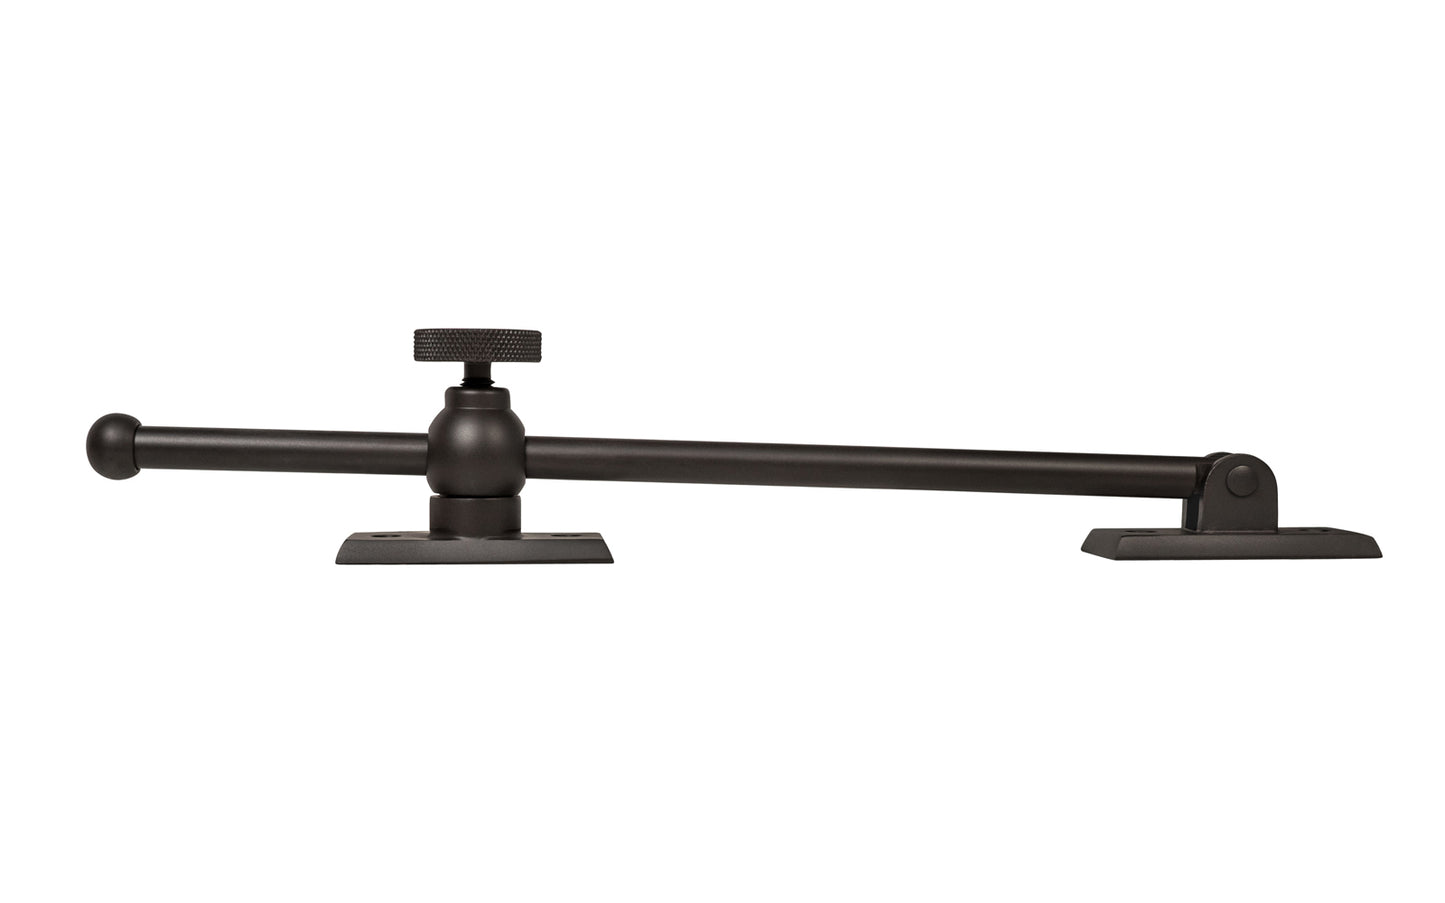 Vintage-style Classic & Premium Solid Brass Casement Adjuster Stay ~ 10" Length. For securing outswing casement windows. It has a durable pivot turn with a knurled knob for smooth & secure operation. Oil Rubbed Bronze Finish